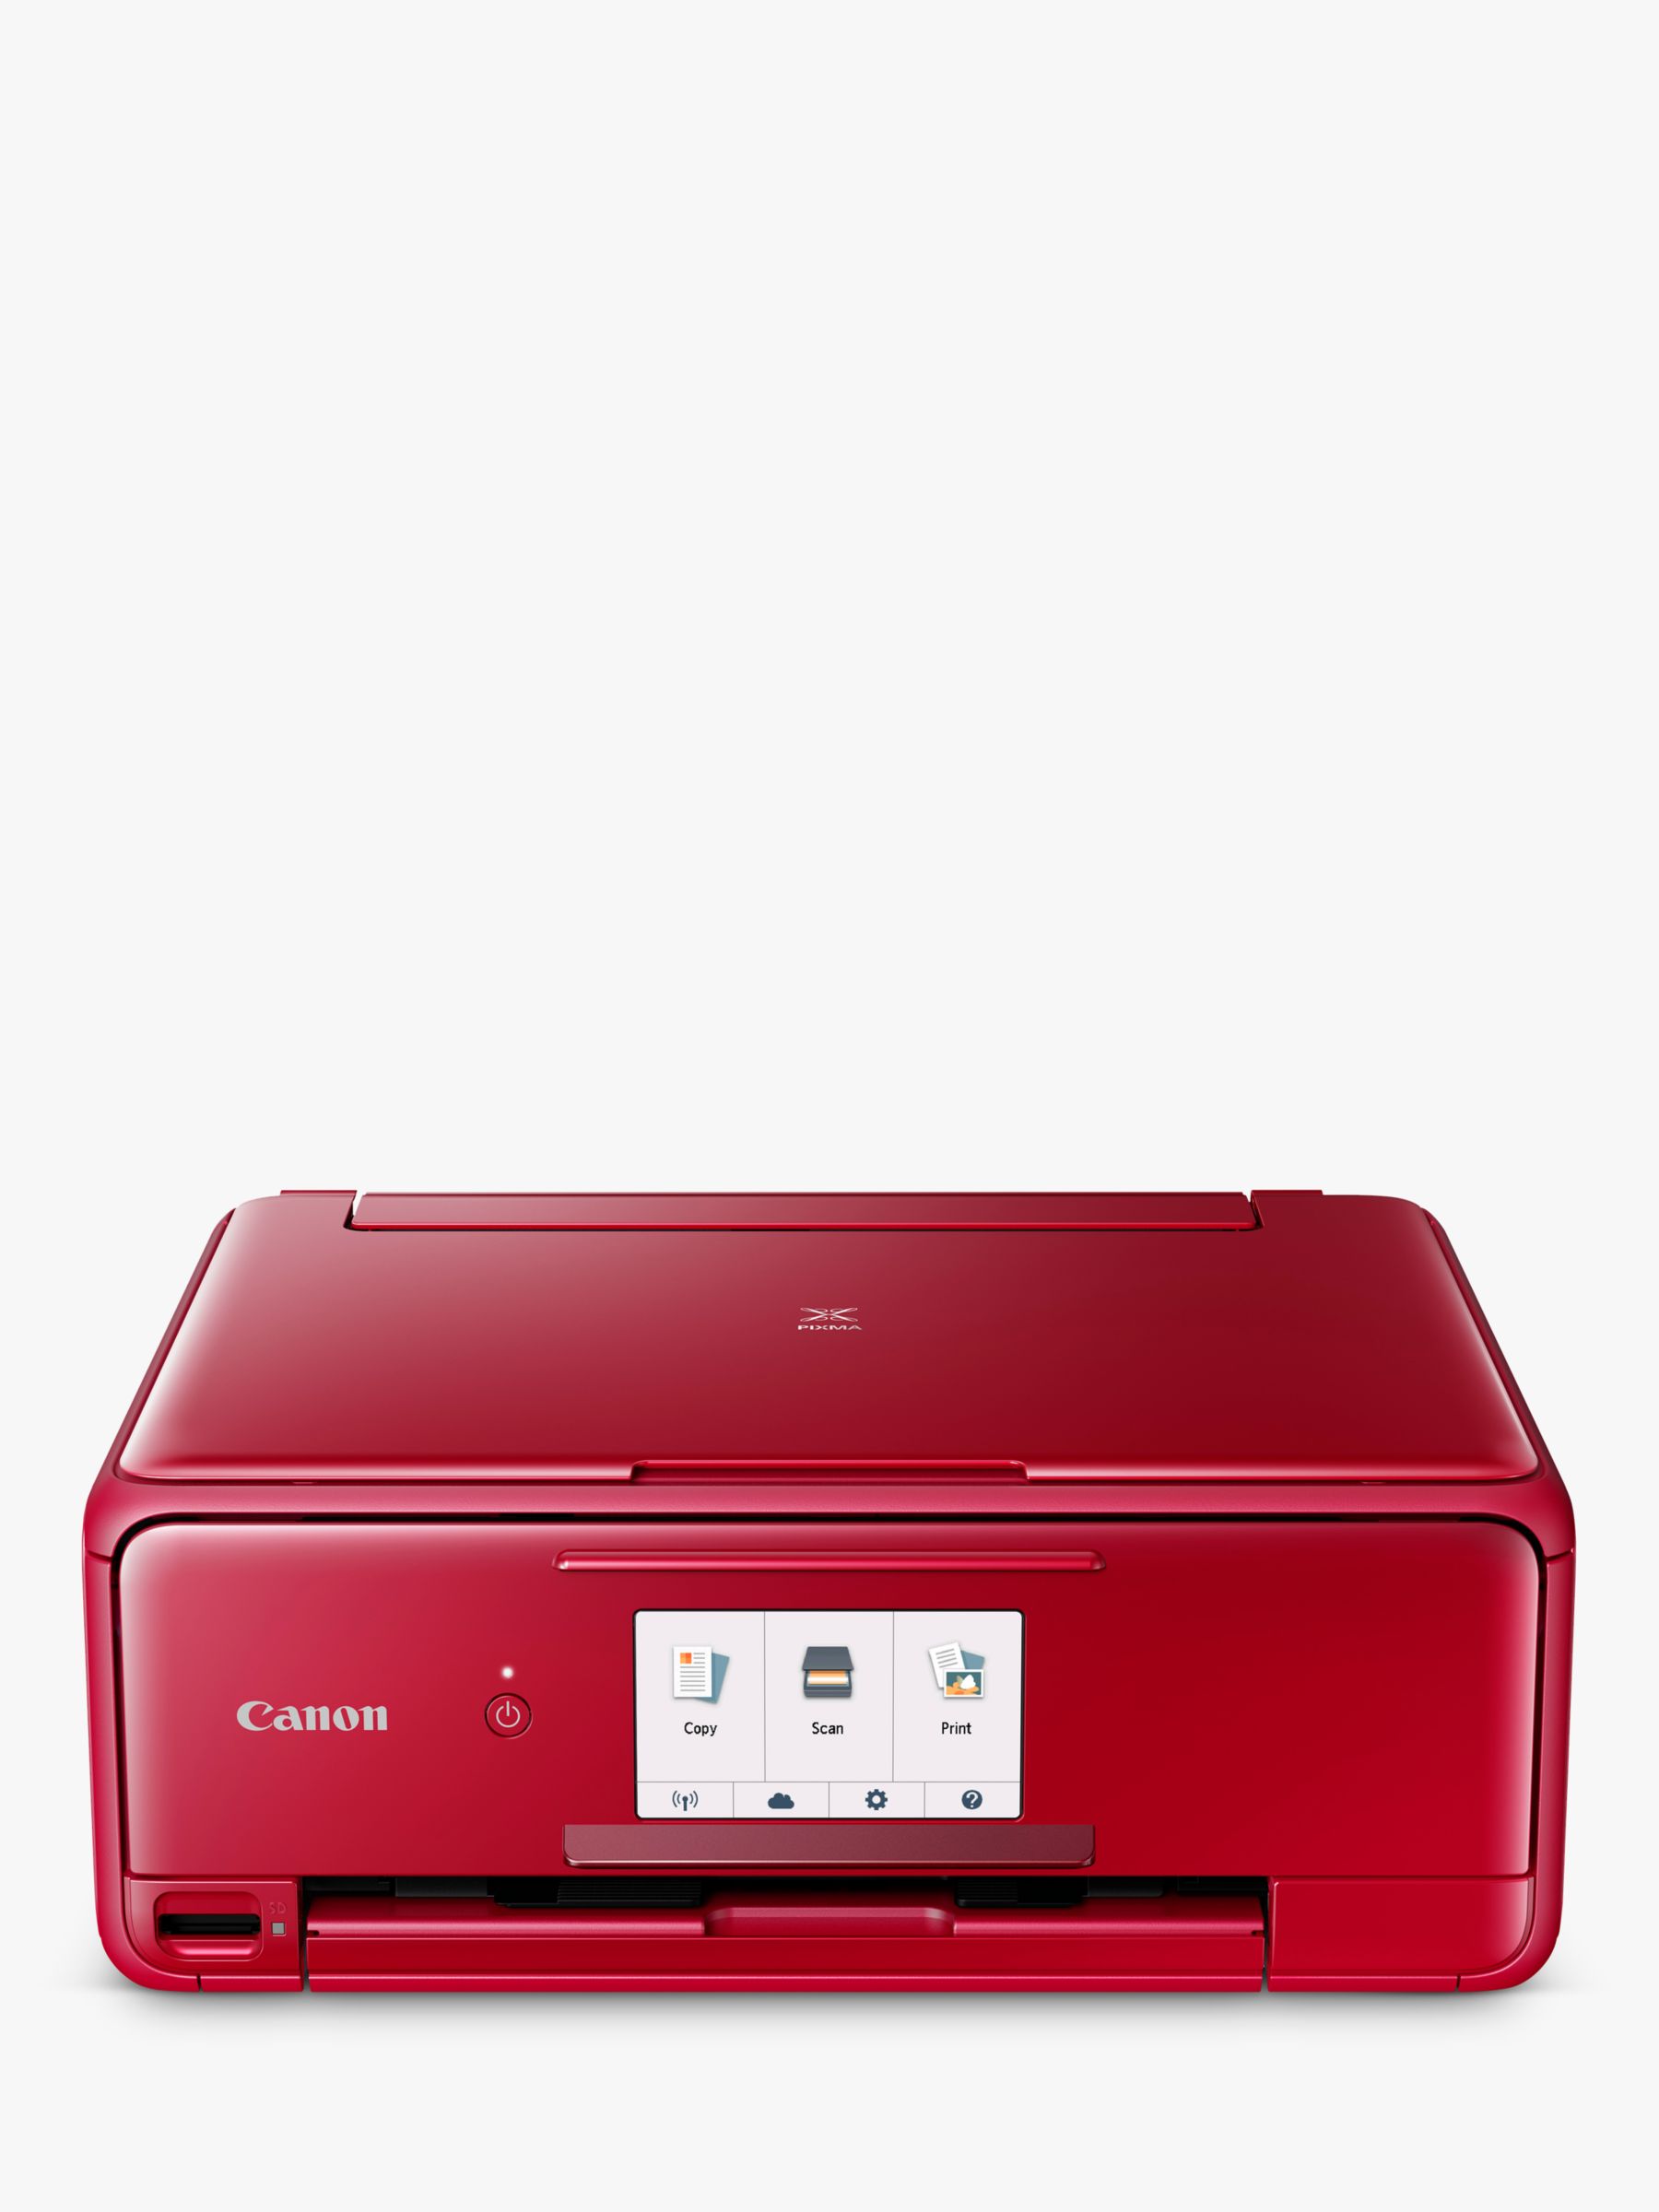 Canon PIXMA TS8152 All-in-One Wireless Wi-Fi Printer with Auto-Tilting Touch Screen, Red